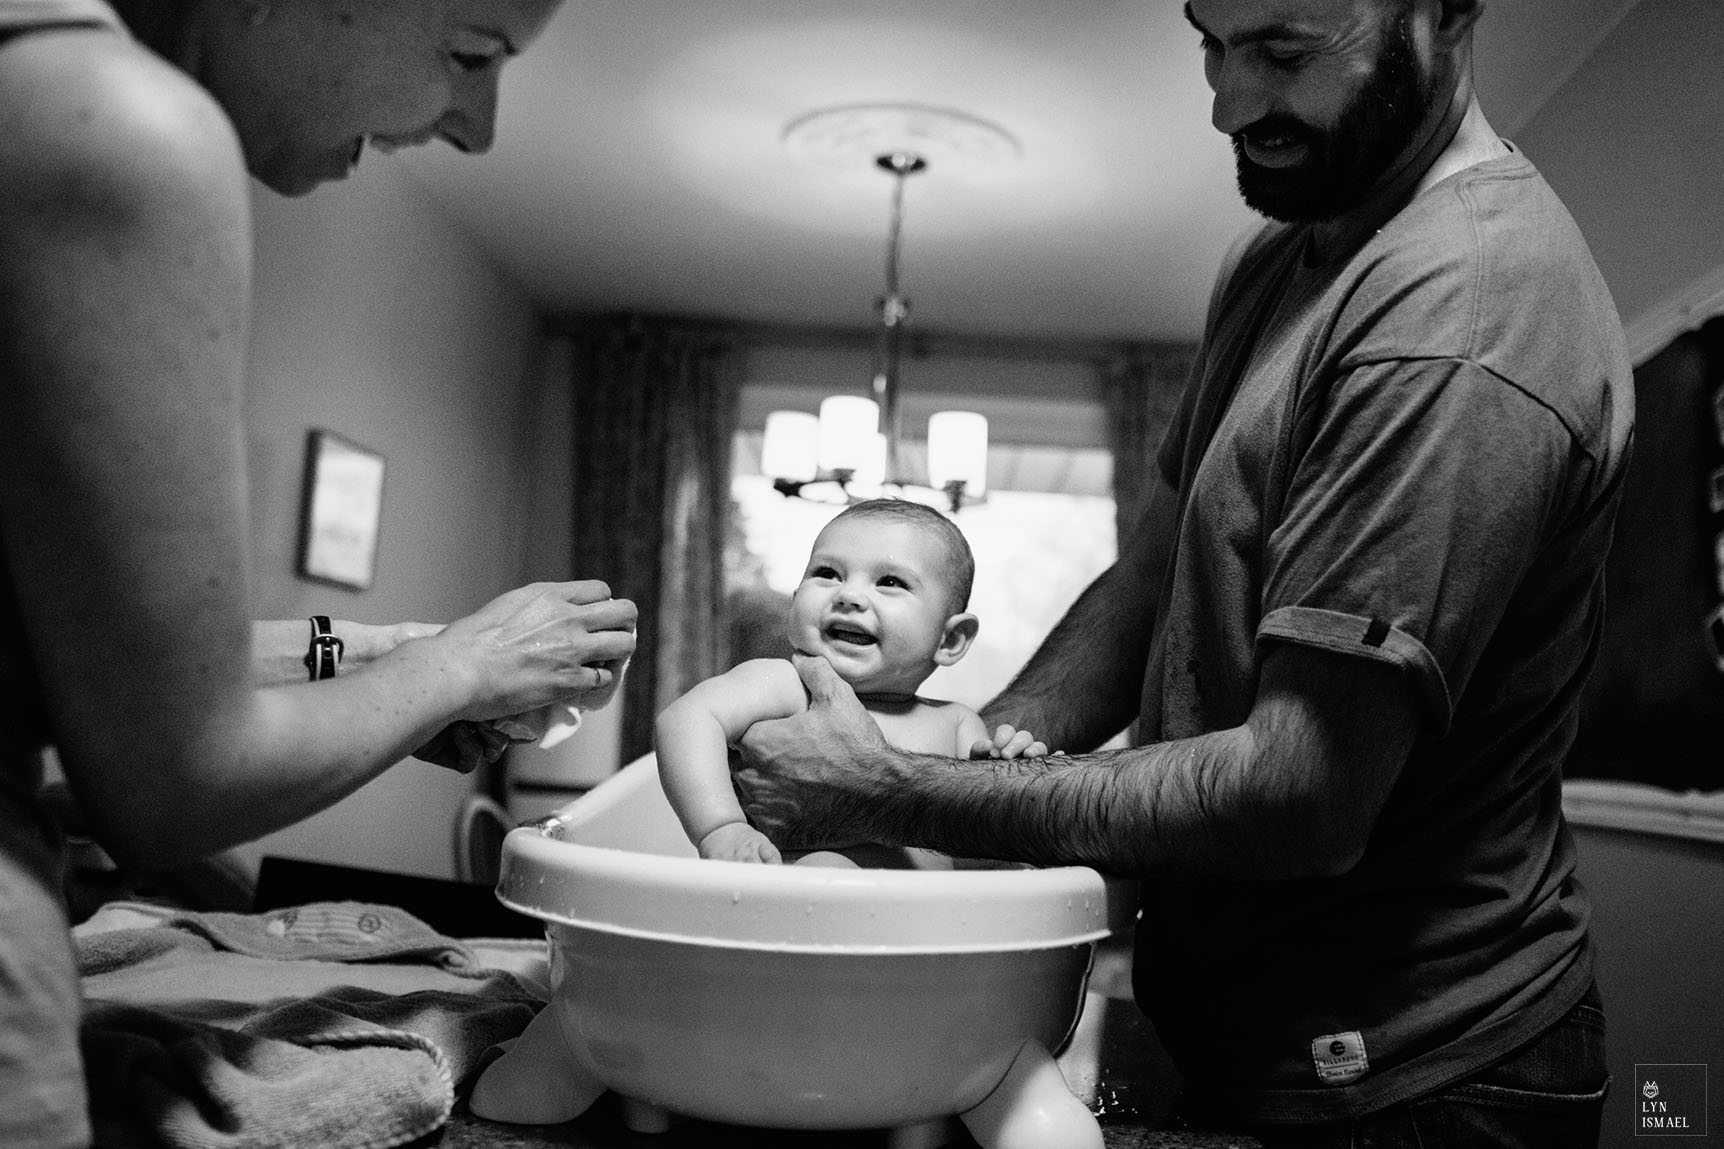 Kitchener family documentary photographer photographs a young family at bath time.